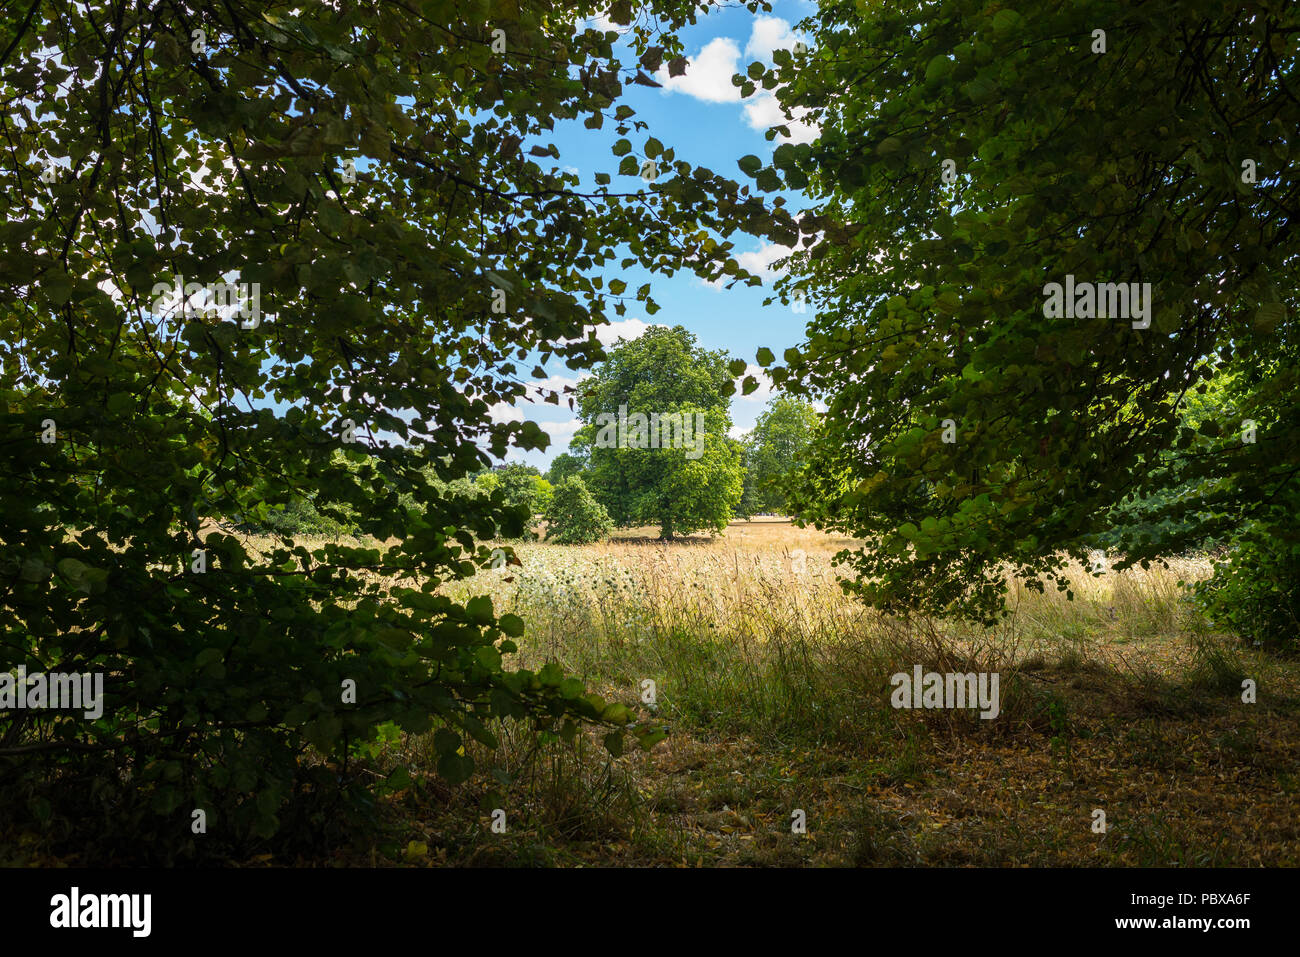 View of a tree standing in a grass meadow field of an outdoor park taken from dense wooded area forest nearby Stock Photo